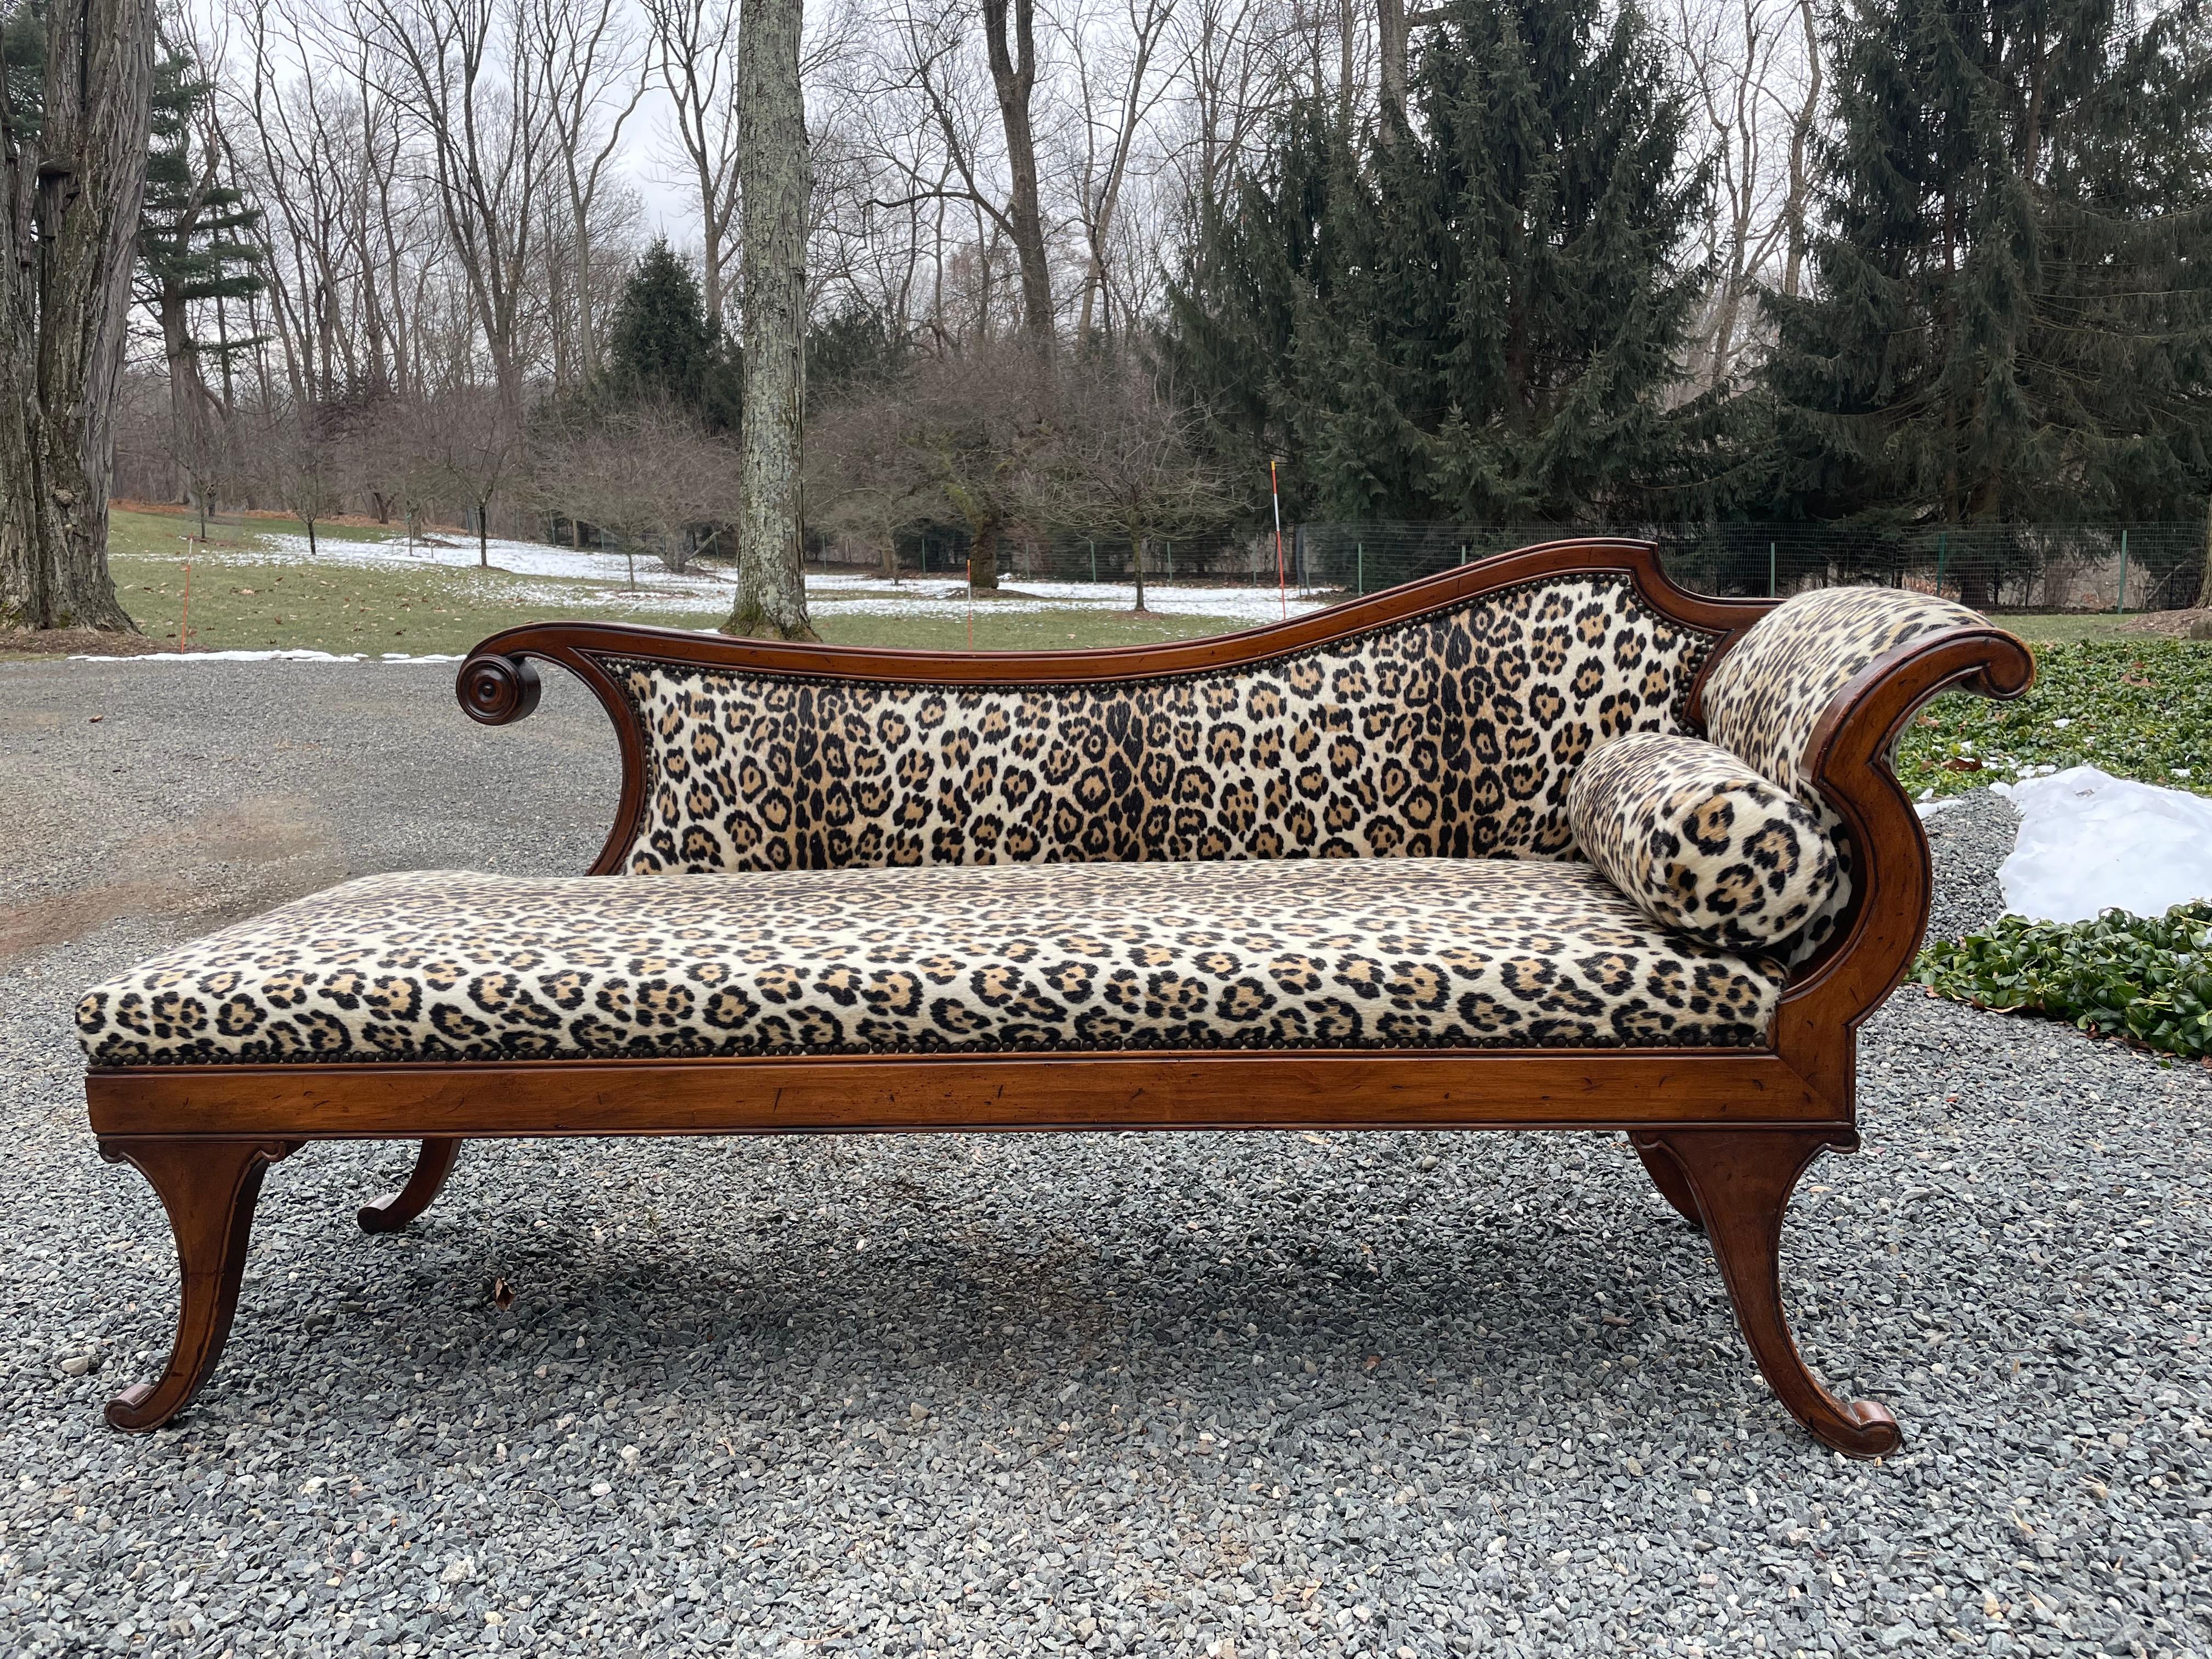 A super glam vintage Regency style chaise lounge or recamier upholstered in a timeless dramatic leopard faux fur. The wood has a cherry finish and the has nailhead detailing. Rolled cushion included.